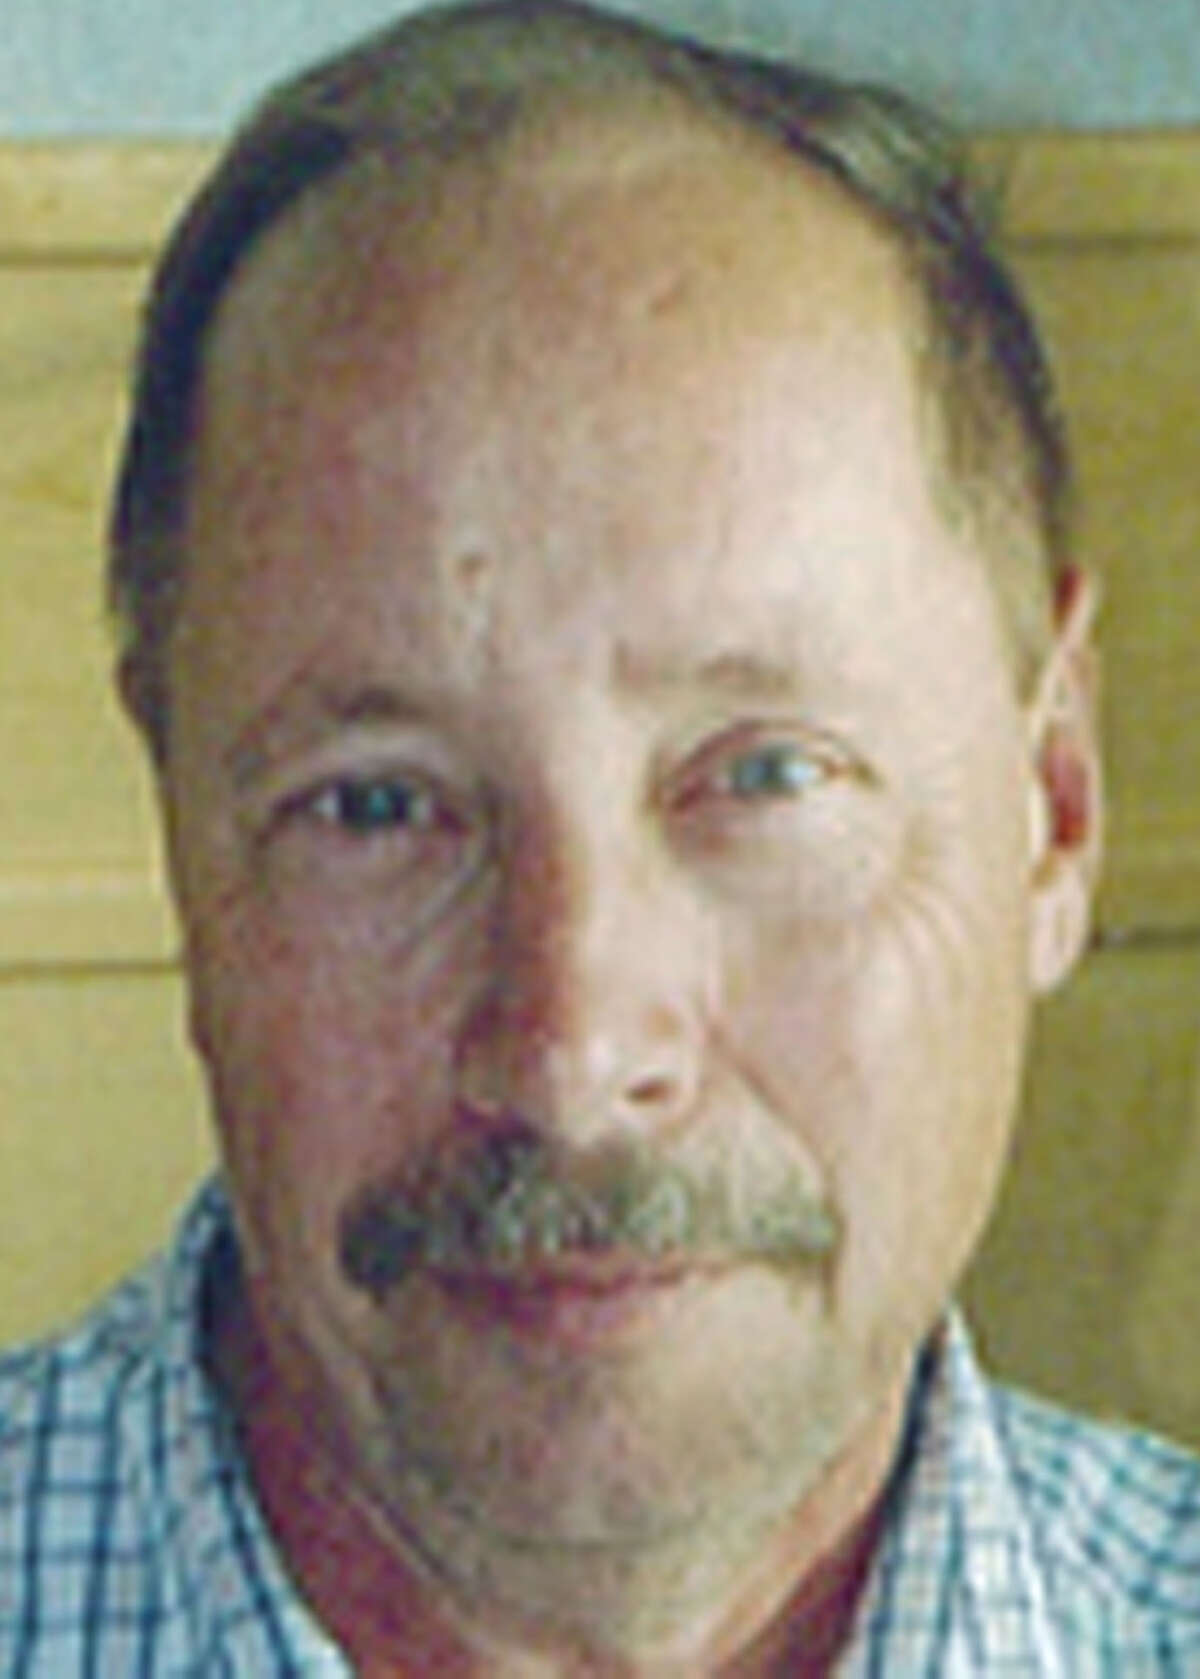 Rocho Lucsky, 62, of New Fairfield died Sept. 22, 2012, at Bethel Healthcare. He was the husband of Christine (Saunders) Lucsky. Mr. Lucsky was born, Nov. 7, 1949, in St. Louis, Mo., the son of the late Andrew S. and Christine F. (Meyer) Lucsky.